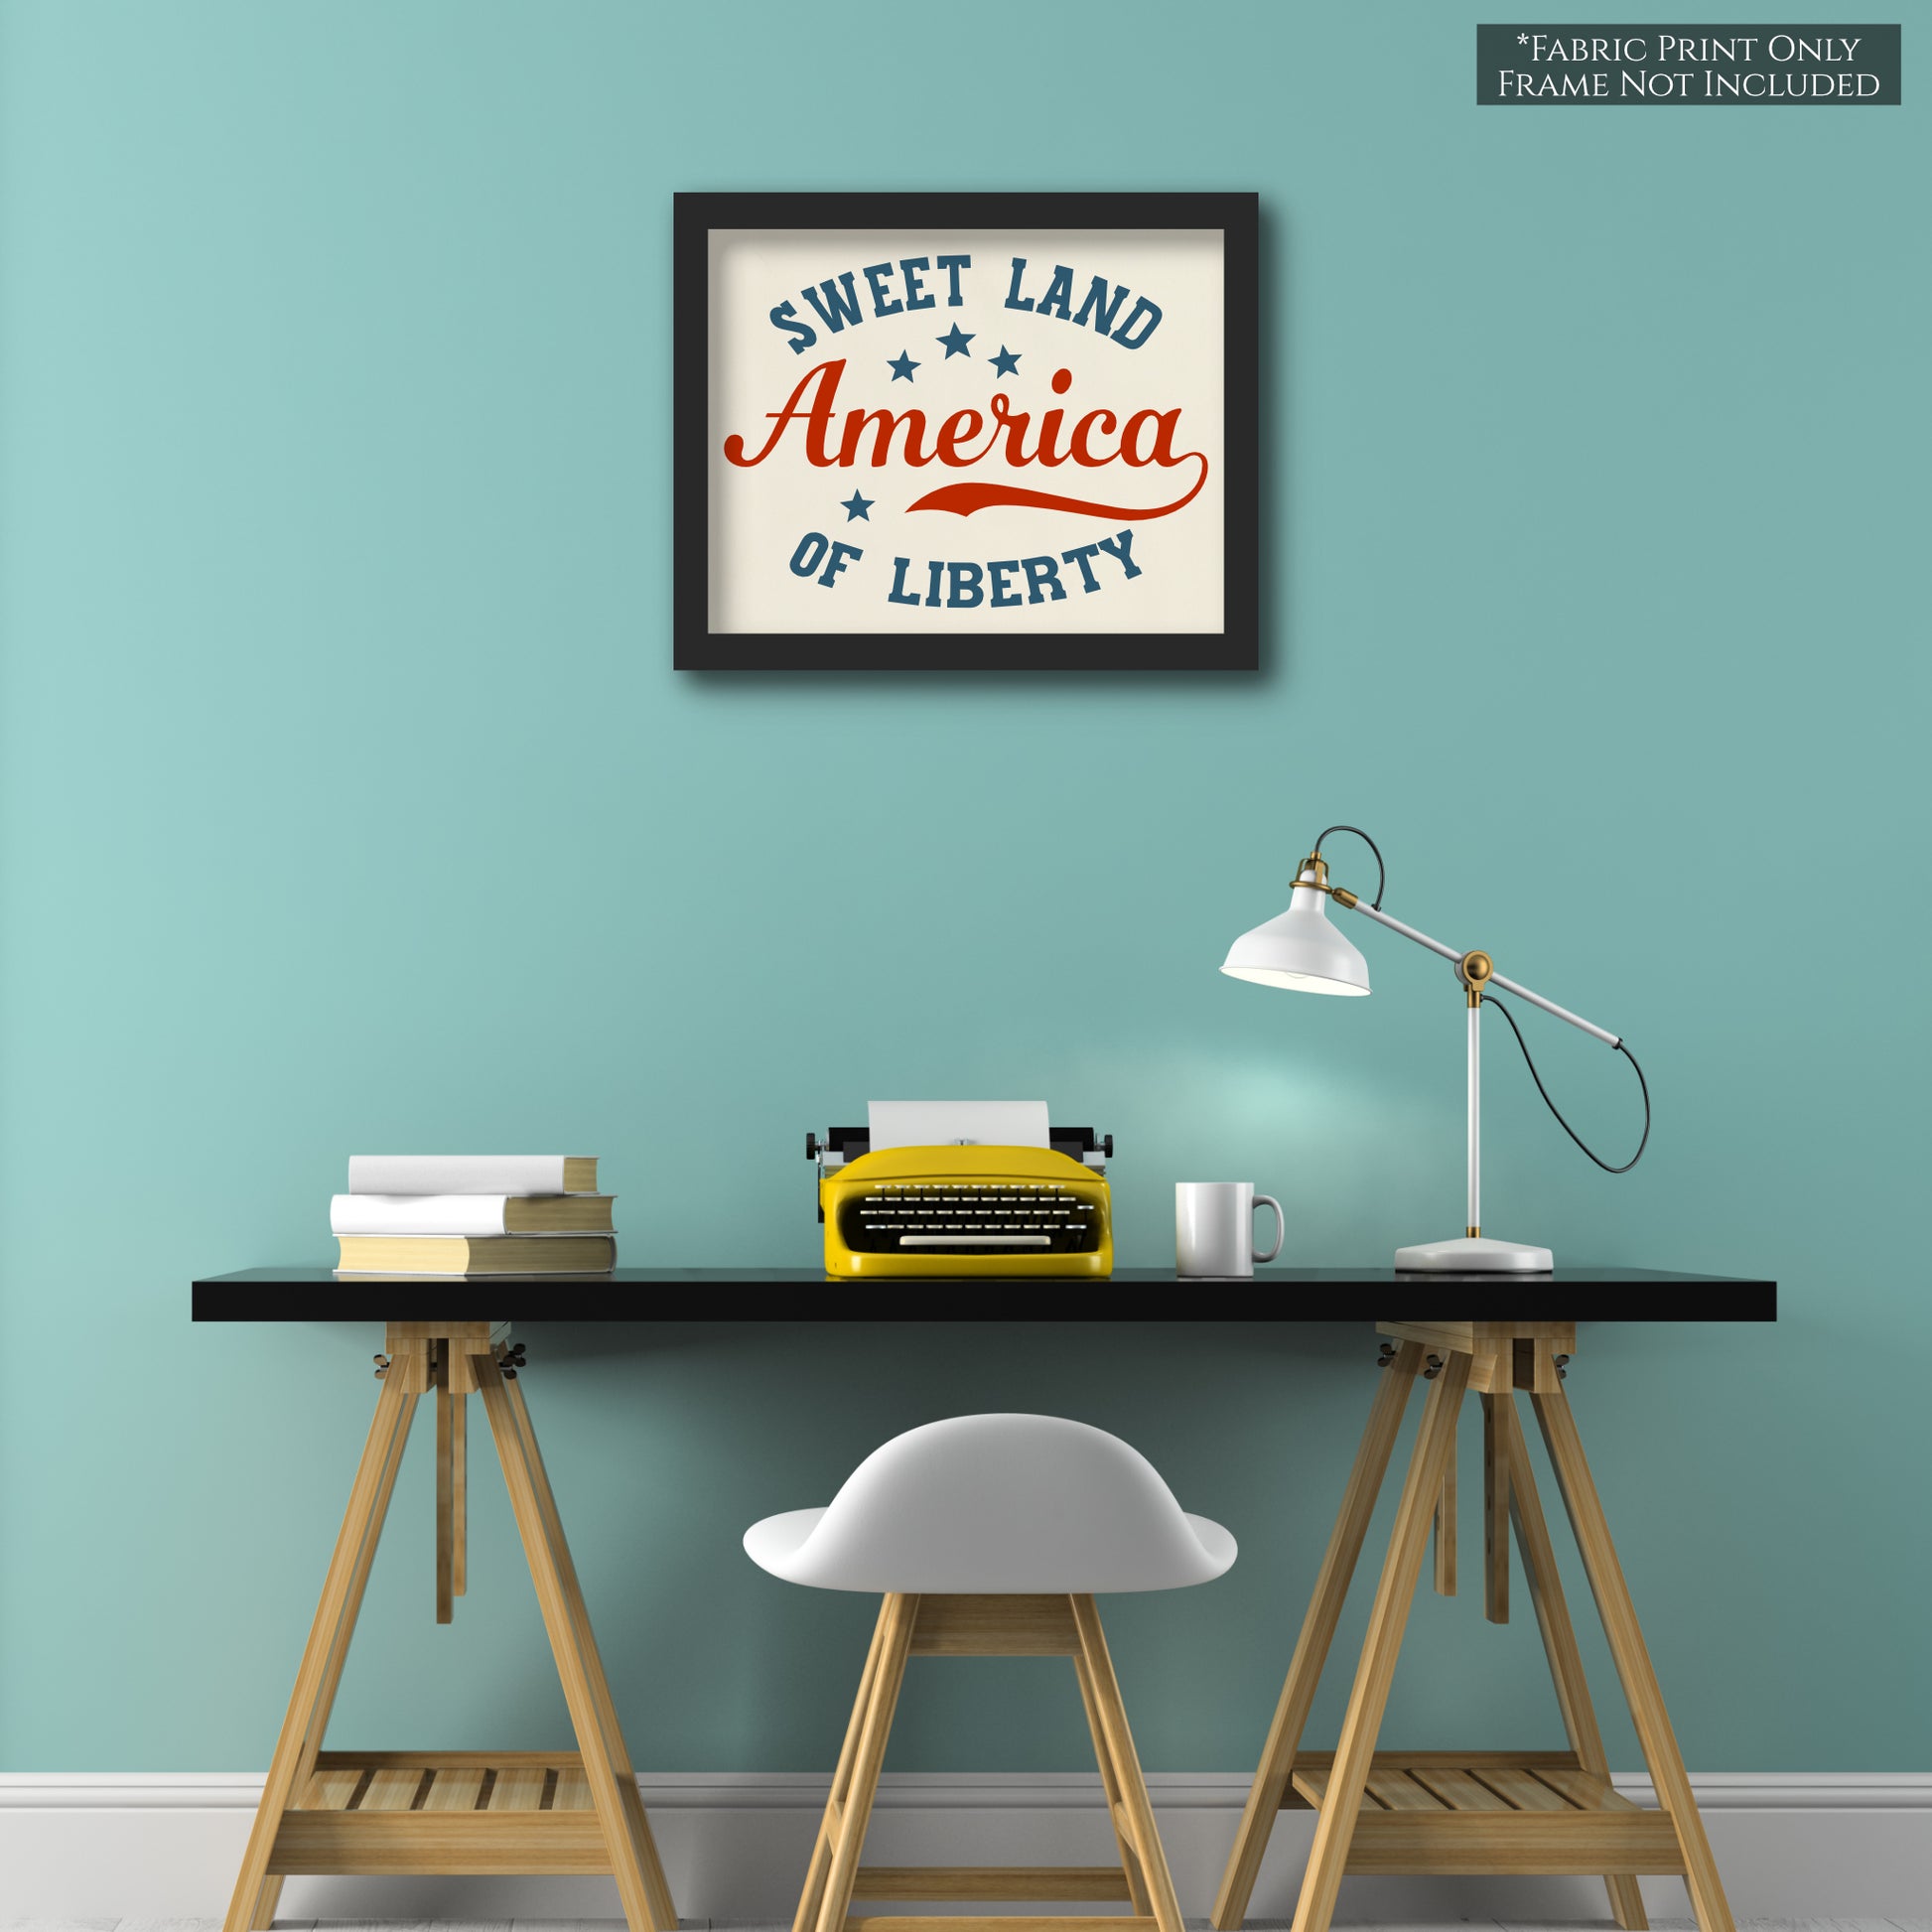 Sweet Land of Liberty - America - Americana Fabric, Patriotic Quilt, Quilting, USA - Wall Art